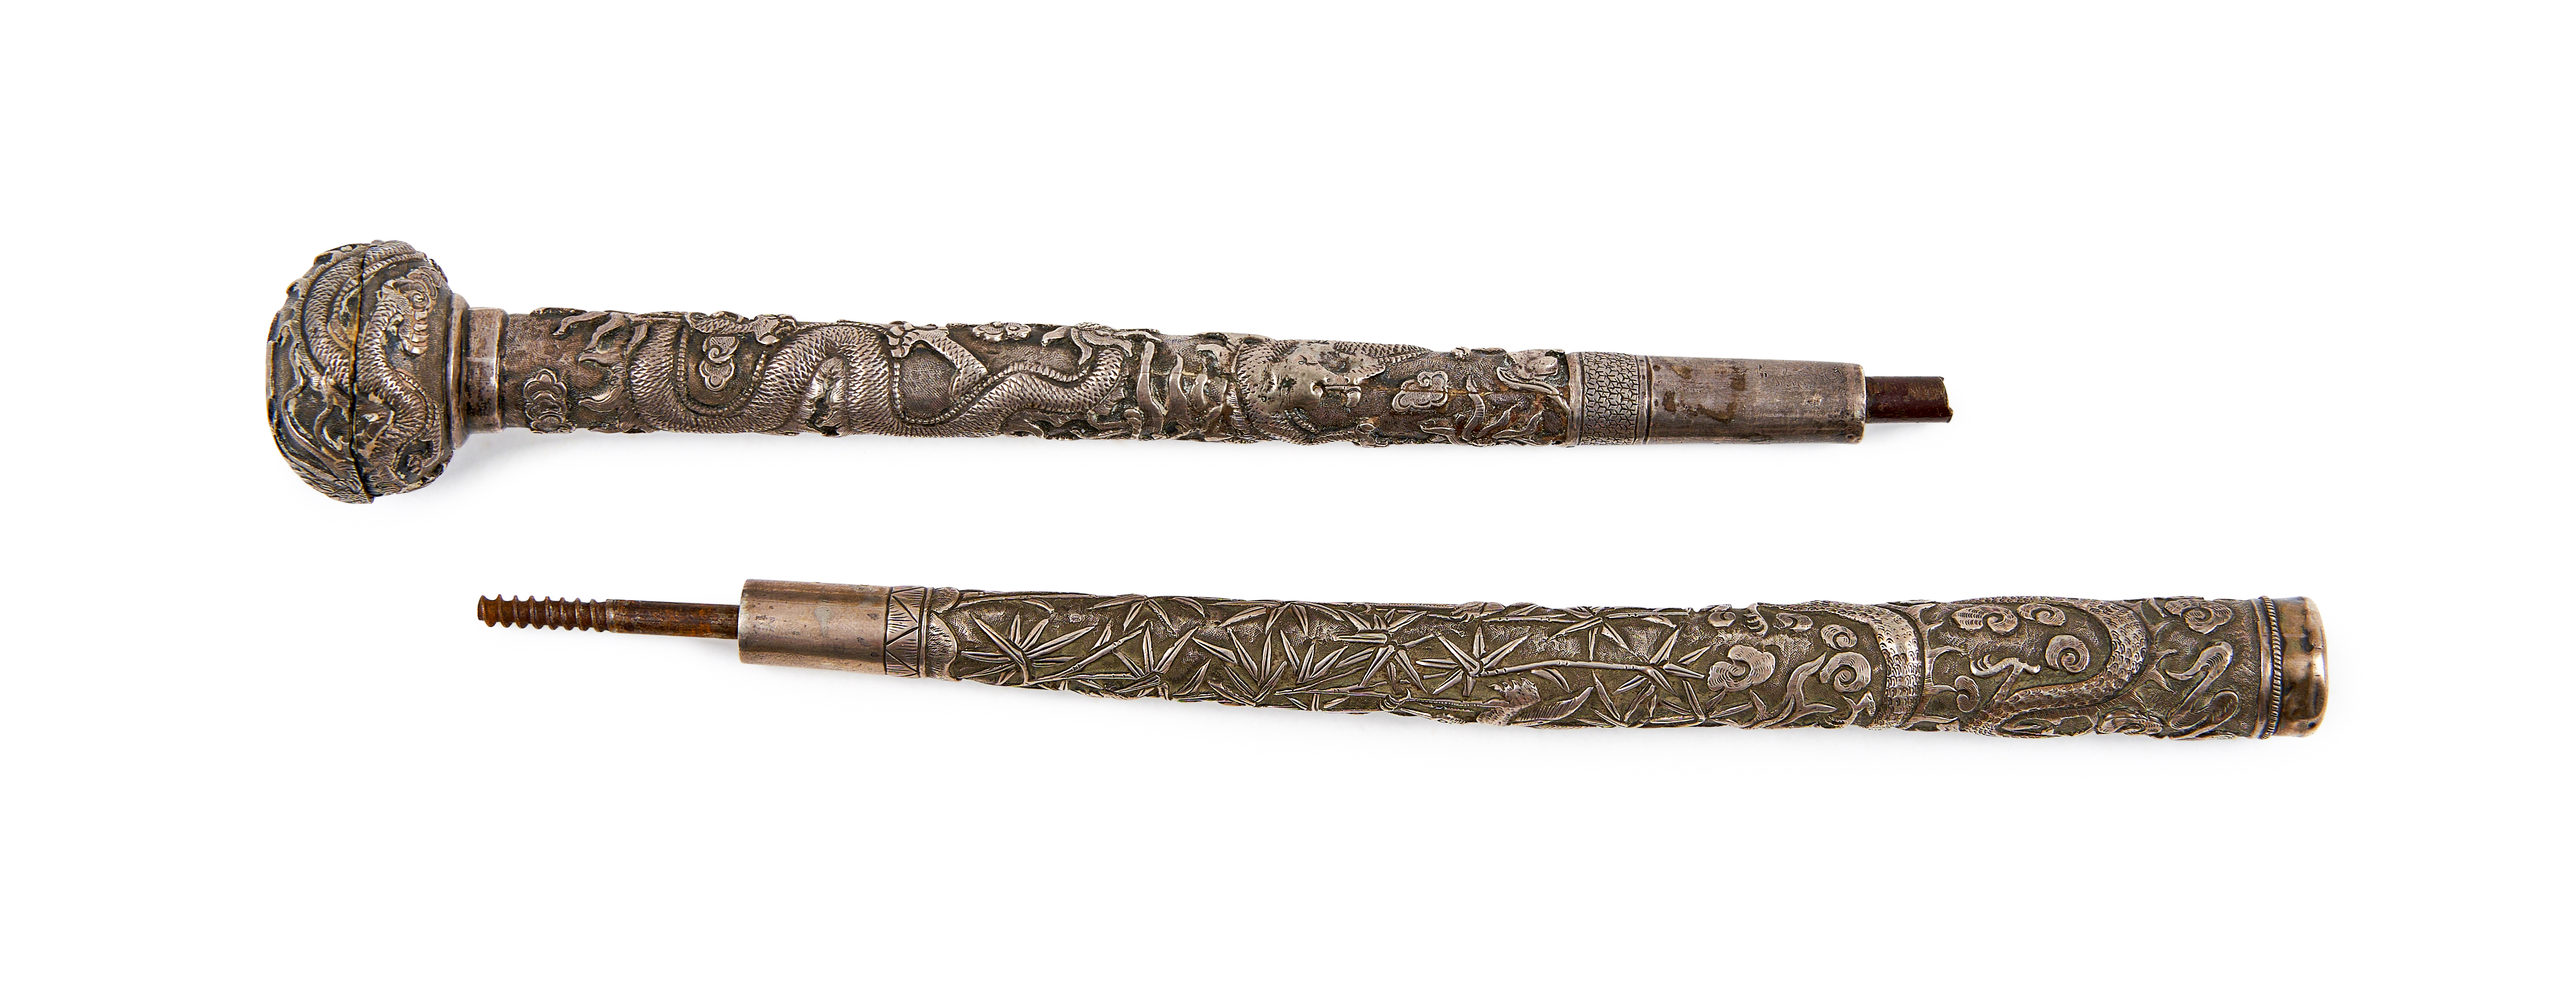 TWO CHINESE EXPORT SILVER OBJECTS, PROBABLY A CANE - Image 2 of 6